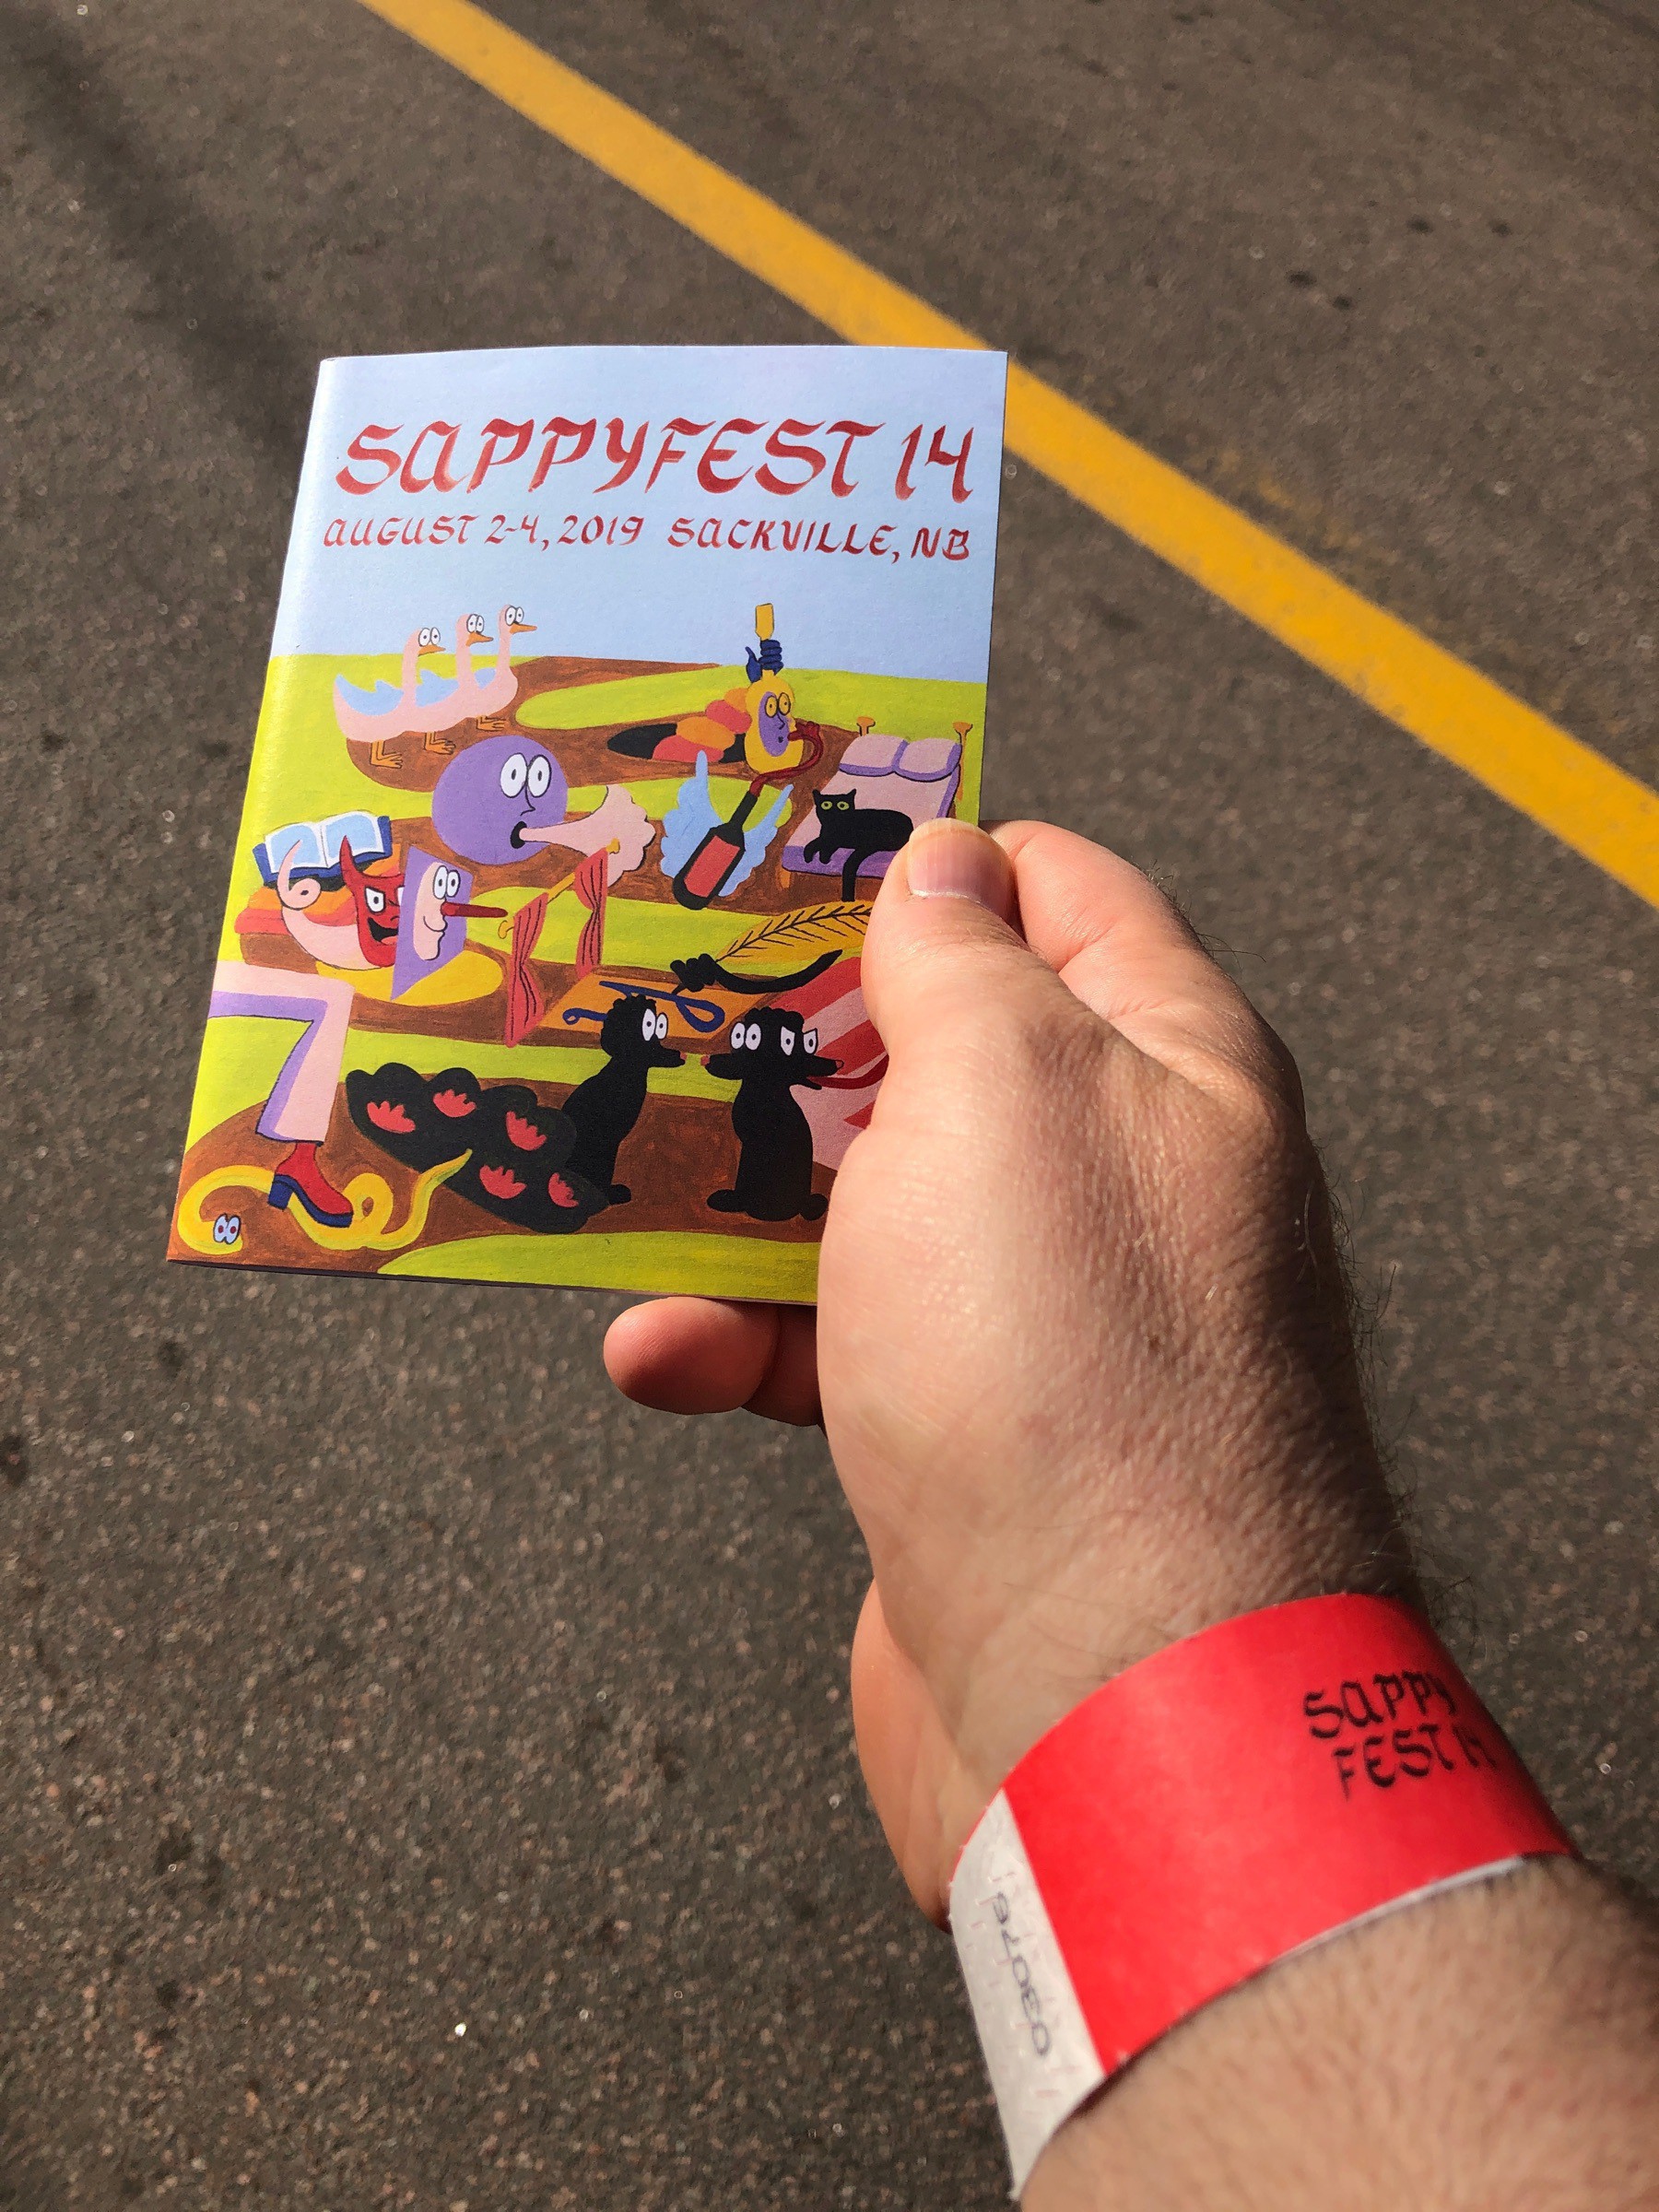 Guidebook, hand, and wristband.